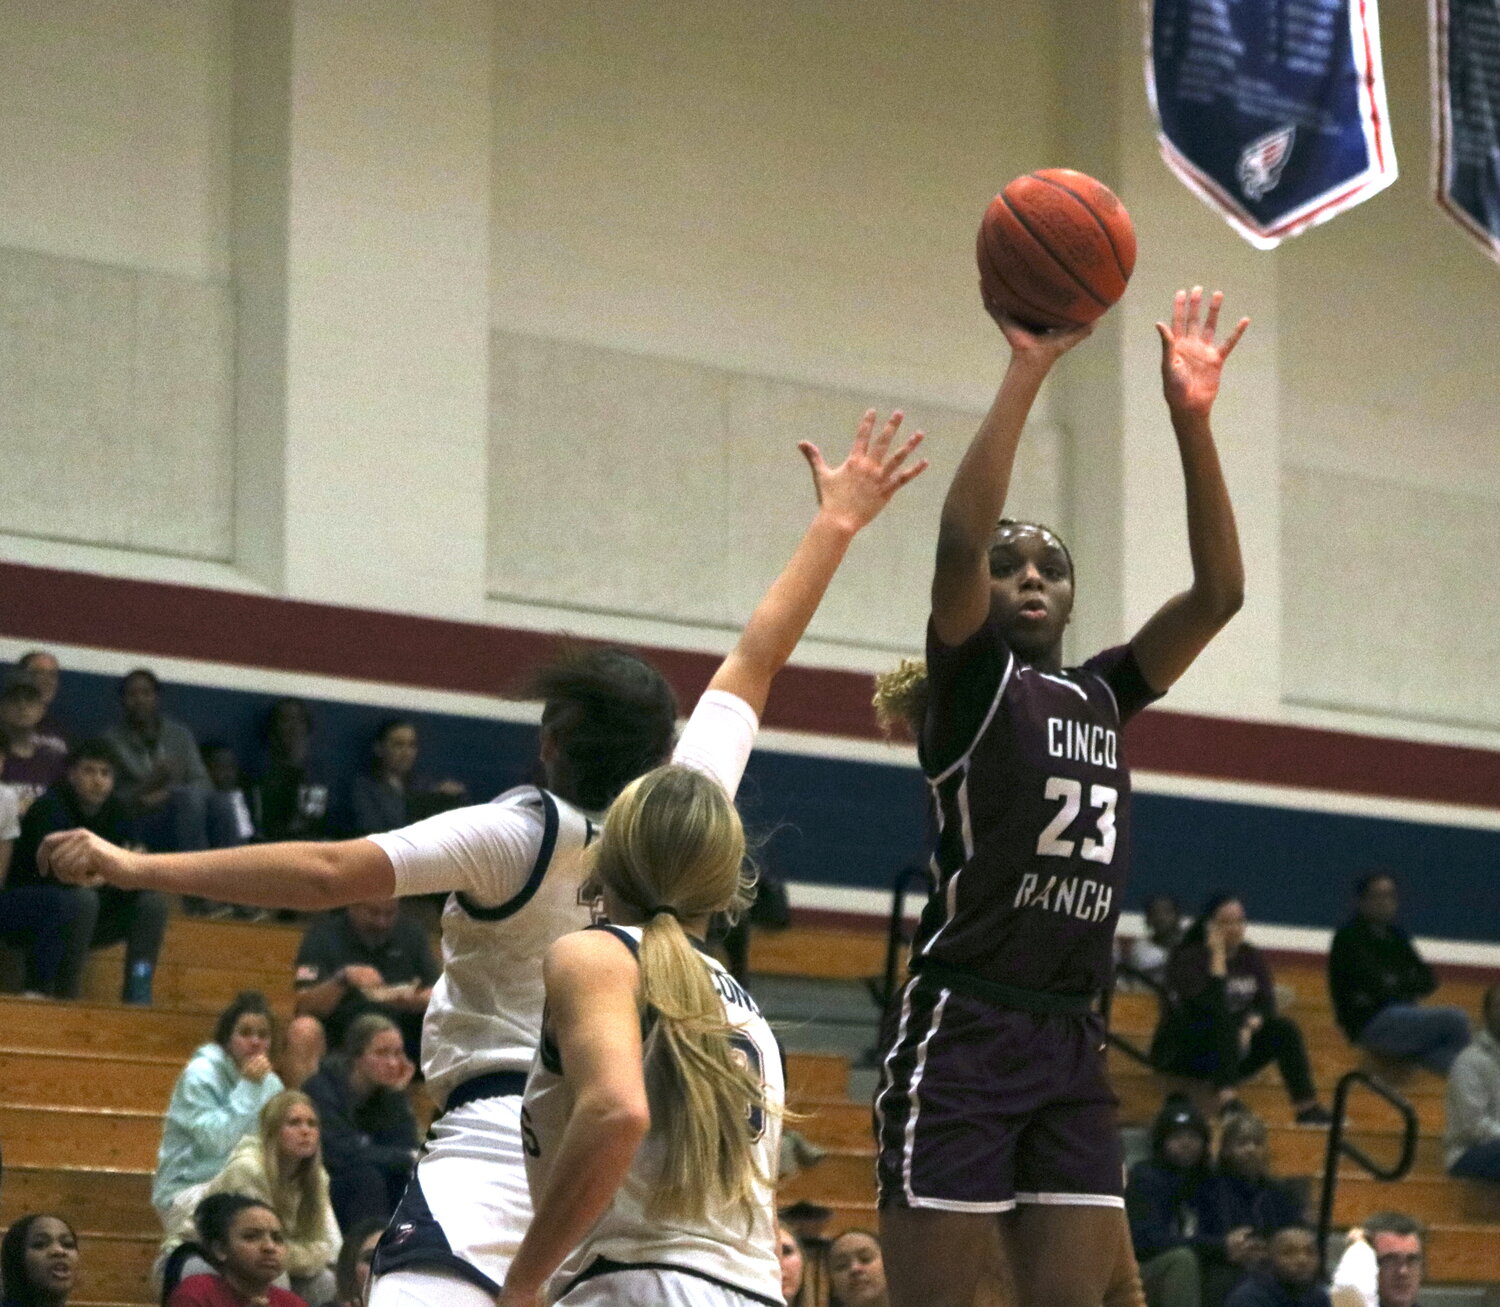 Aniya Foy shoots a jumper during Tuesday's game between Tompkins and Cinco Ranch at the Tompkins gym.